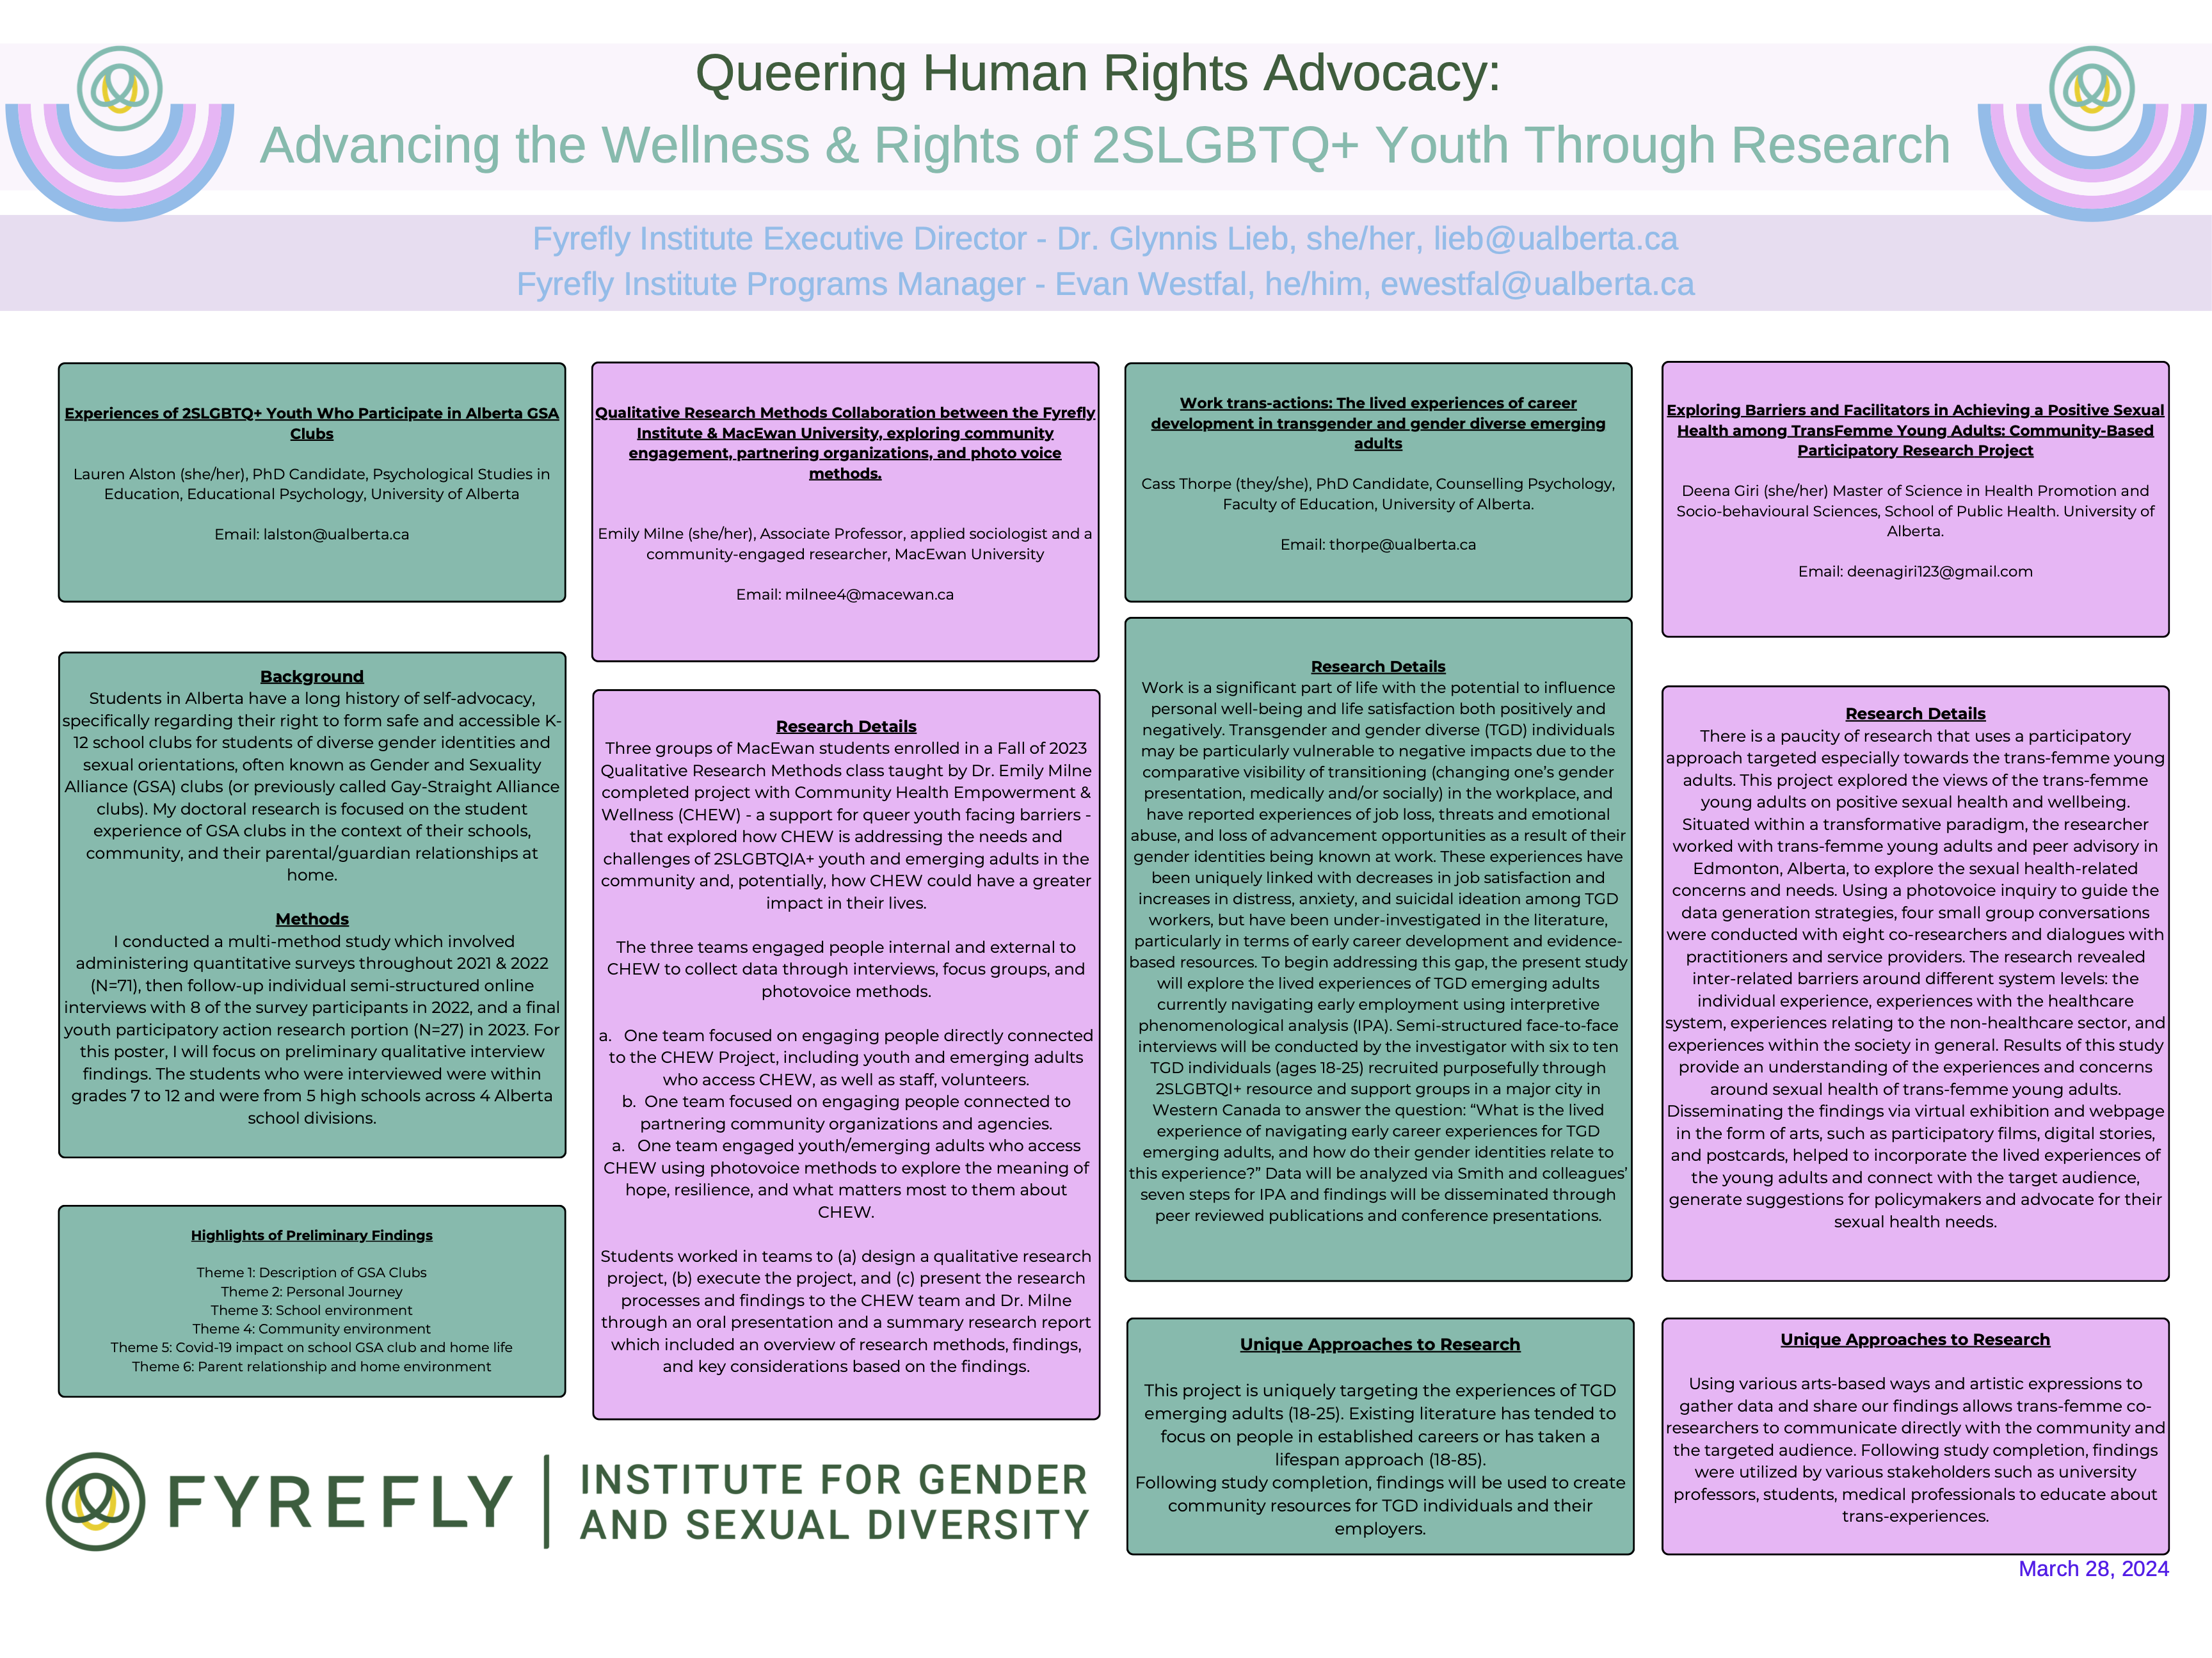 queering-human-rights-advocacy-poster-1.png